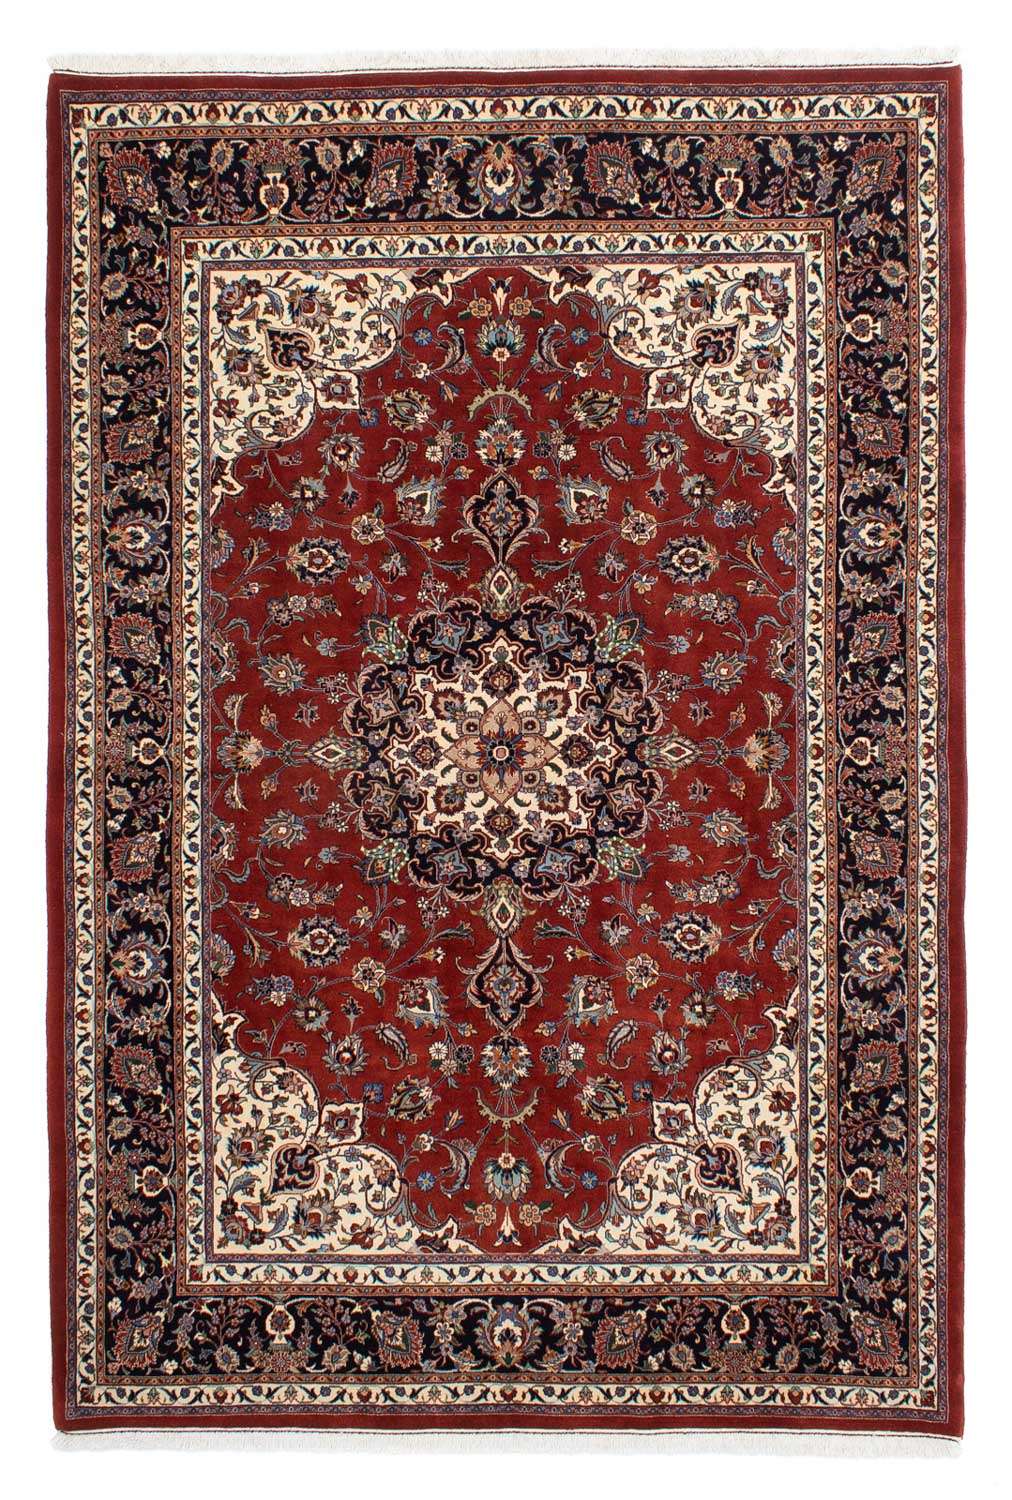 Perser Rug - Classic - 306 x 199 cm - red